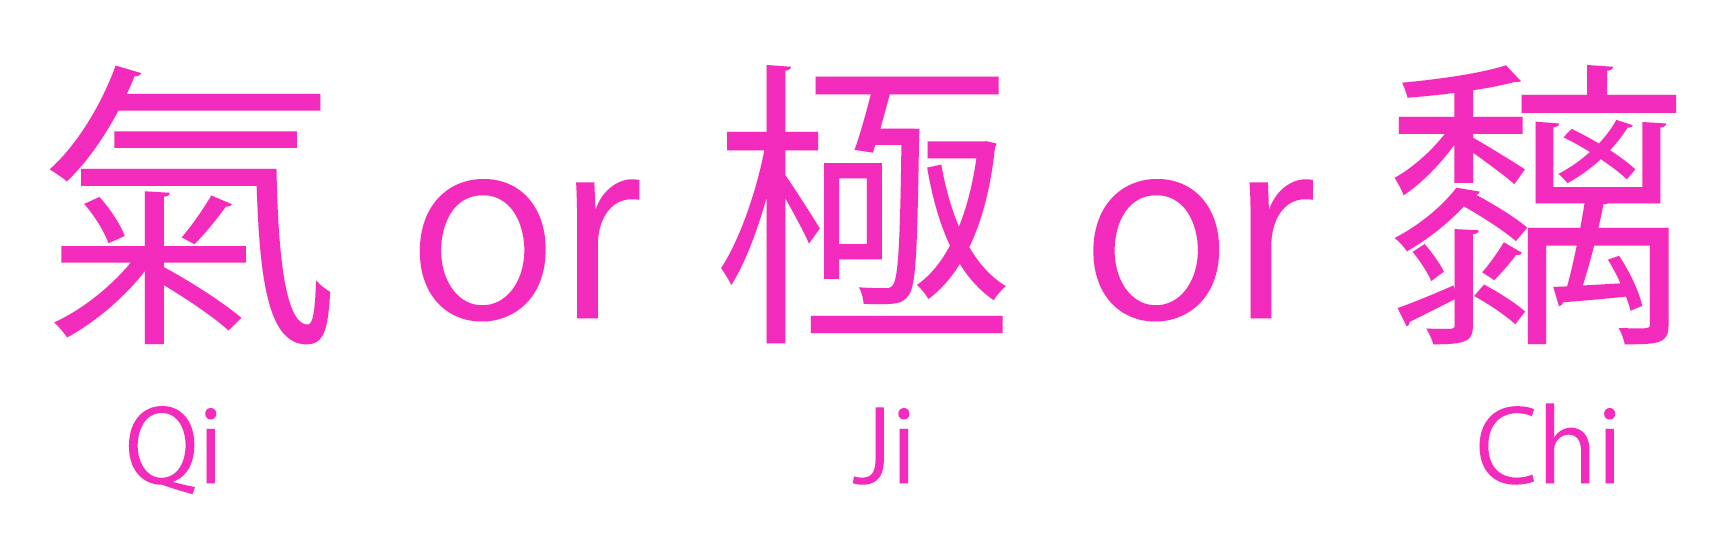 Showing each of the characters for Qi, Ji, and Chi along with the transliteration to show the difference